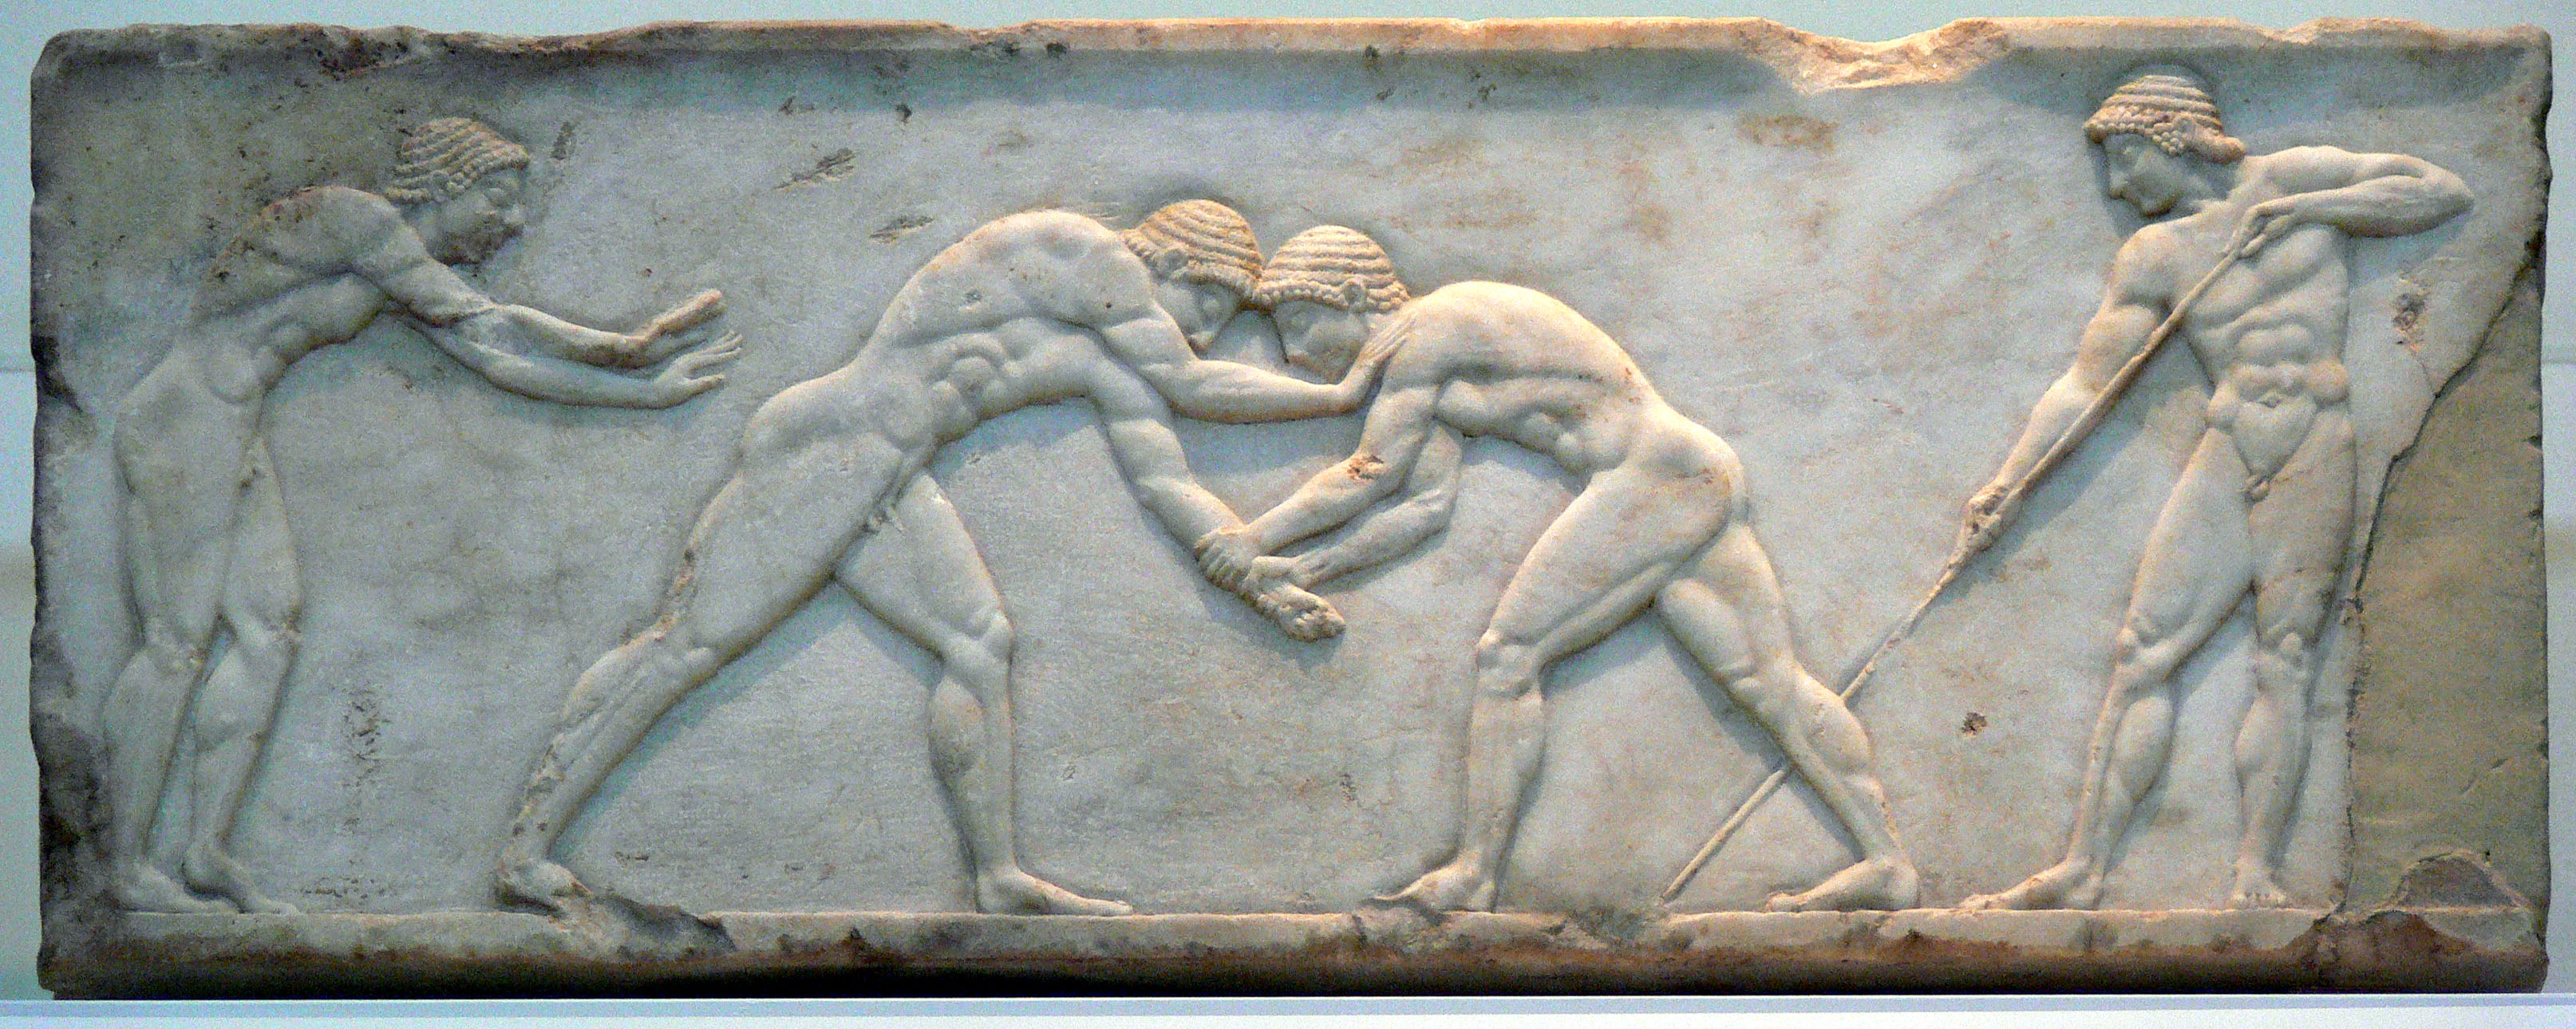 Ancient olympic wrestling from https://commons.wikimedia.org/wiki/File:07Athletengrab.jpg